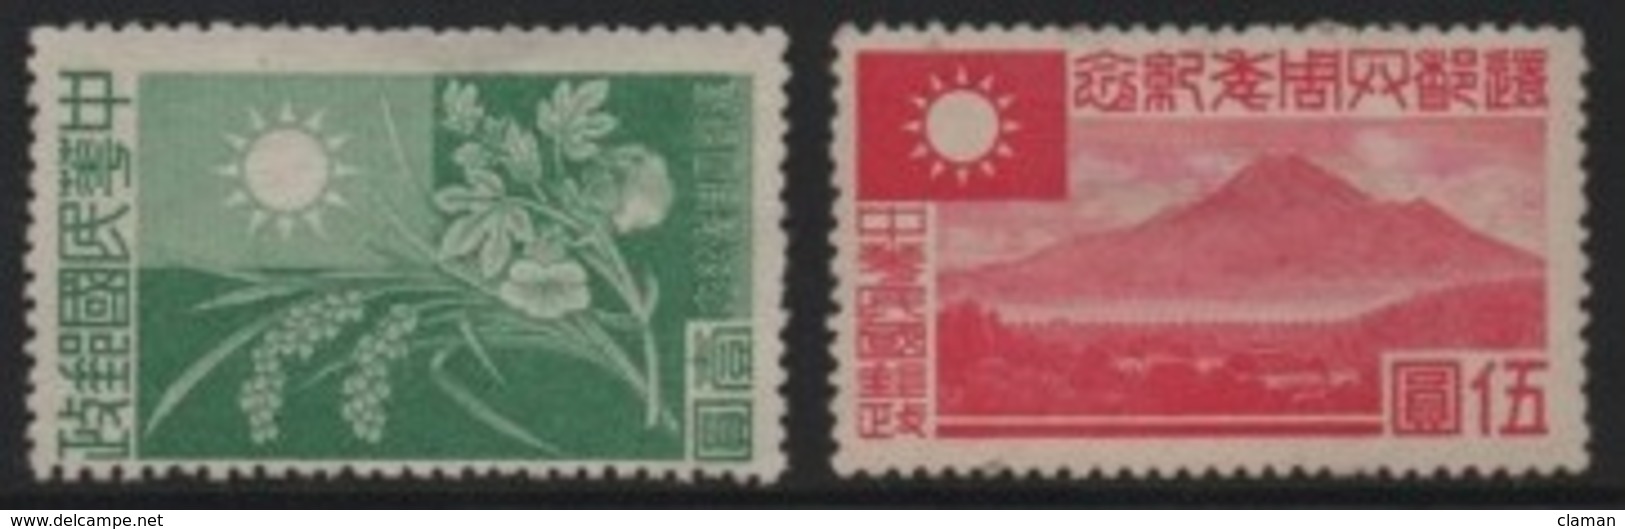 China/Chine - 1944 (Japanese Occupation/Occupation Japonaise) Government/Gouvernement Nankin * - 1943-45 Shanghai & Nanjing